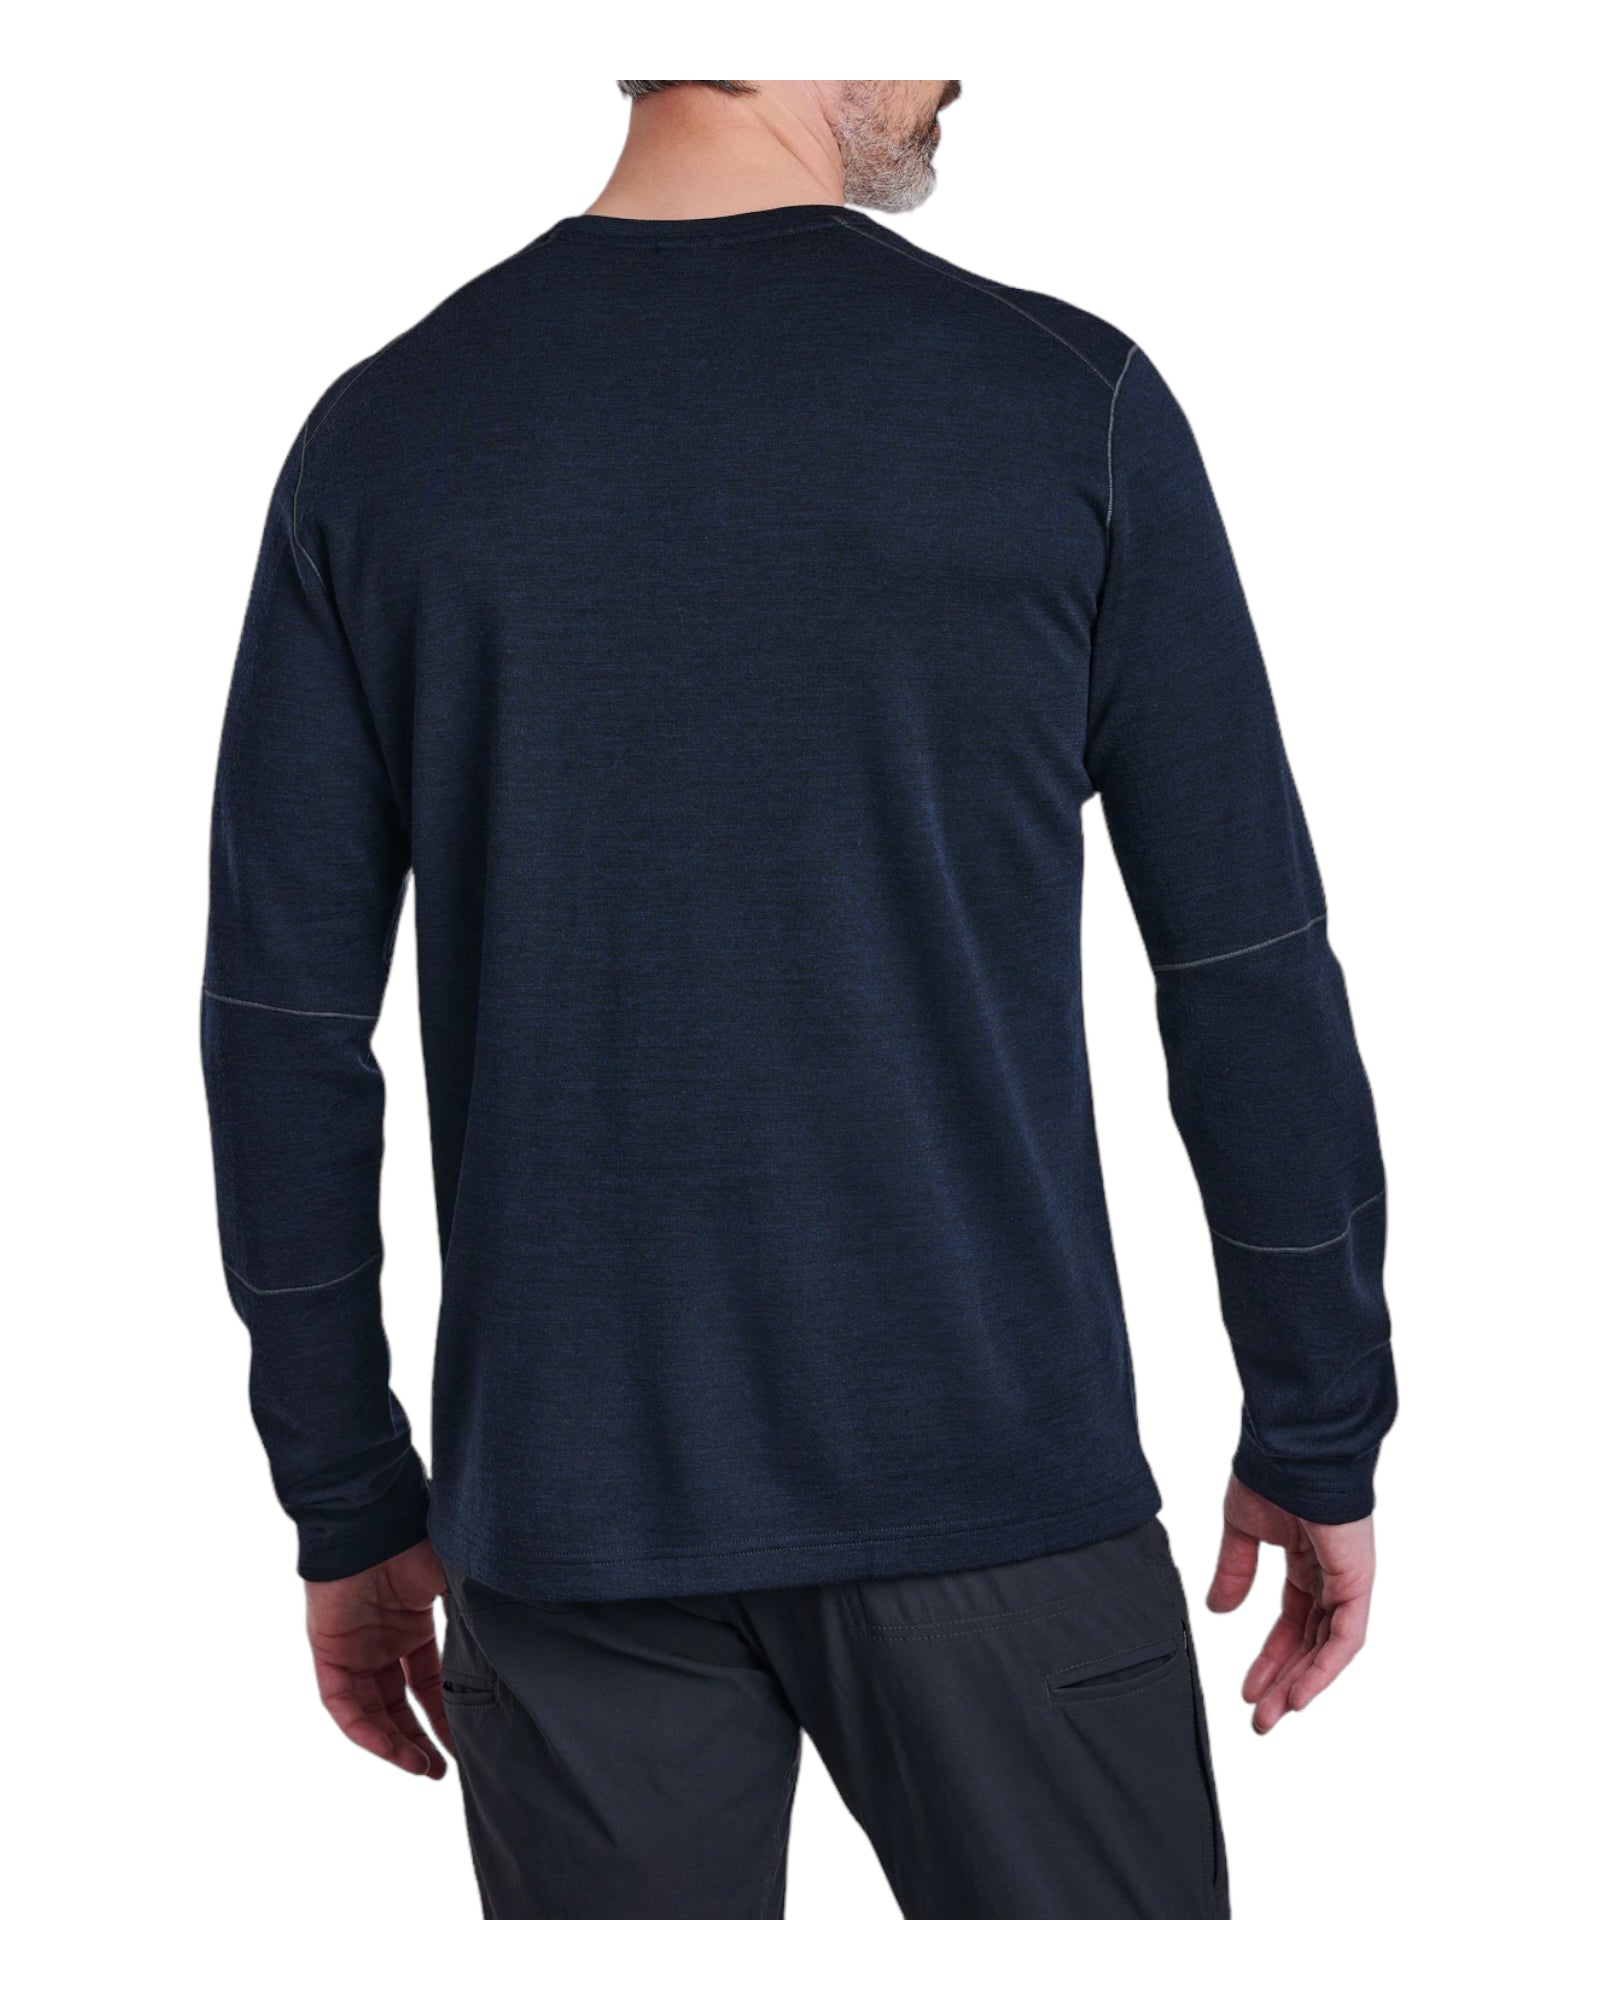 Experience the KÜHL difference with the INVIGORATR MERINO CREW. We chose a superfine Merino so it’s softer on your skin.